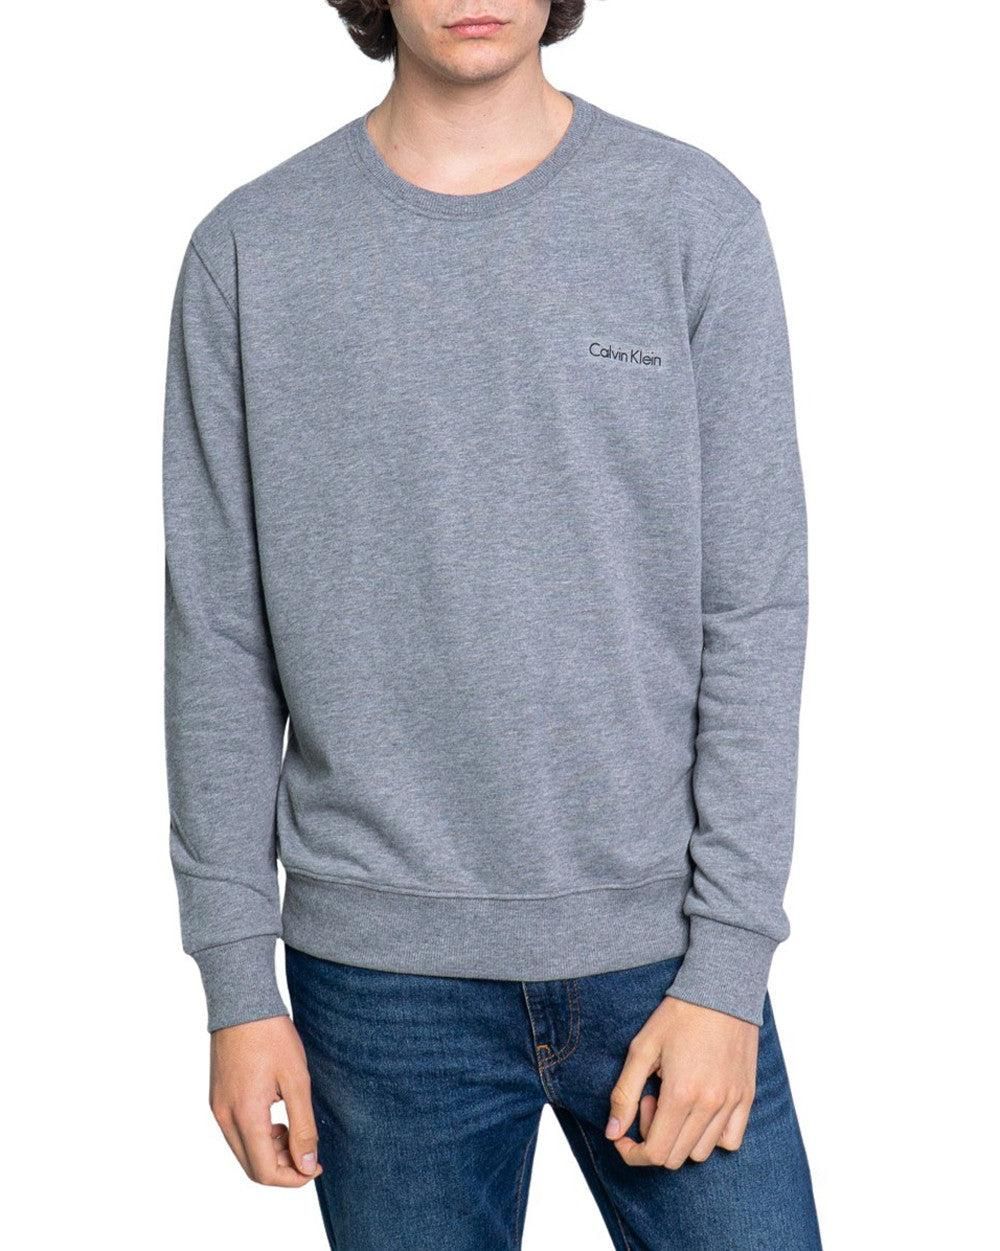 Brand: Calvin Klein Jeans
Gender: Men
Type: Sweatshirts
Season: Spring/Summer

PRODUCT DETAIL
• Color: grey
• Pattern: plain
• Fastening: slip on
• Sleeves: long
• Neckline: round neck

COMPOSITION AND MATERIAL
• Composition: -100% cotton 
•  Washing: machine wash at 30°